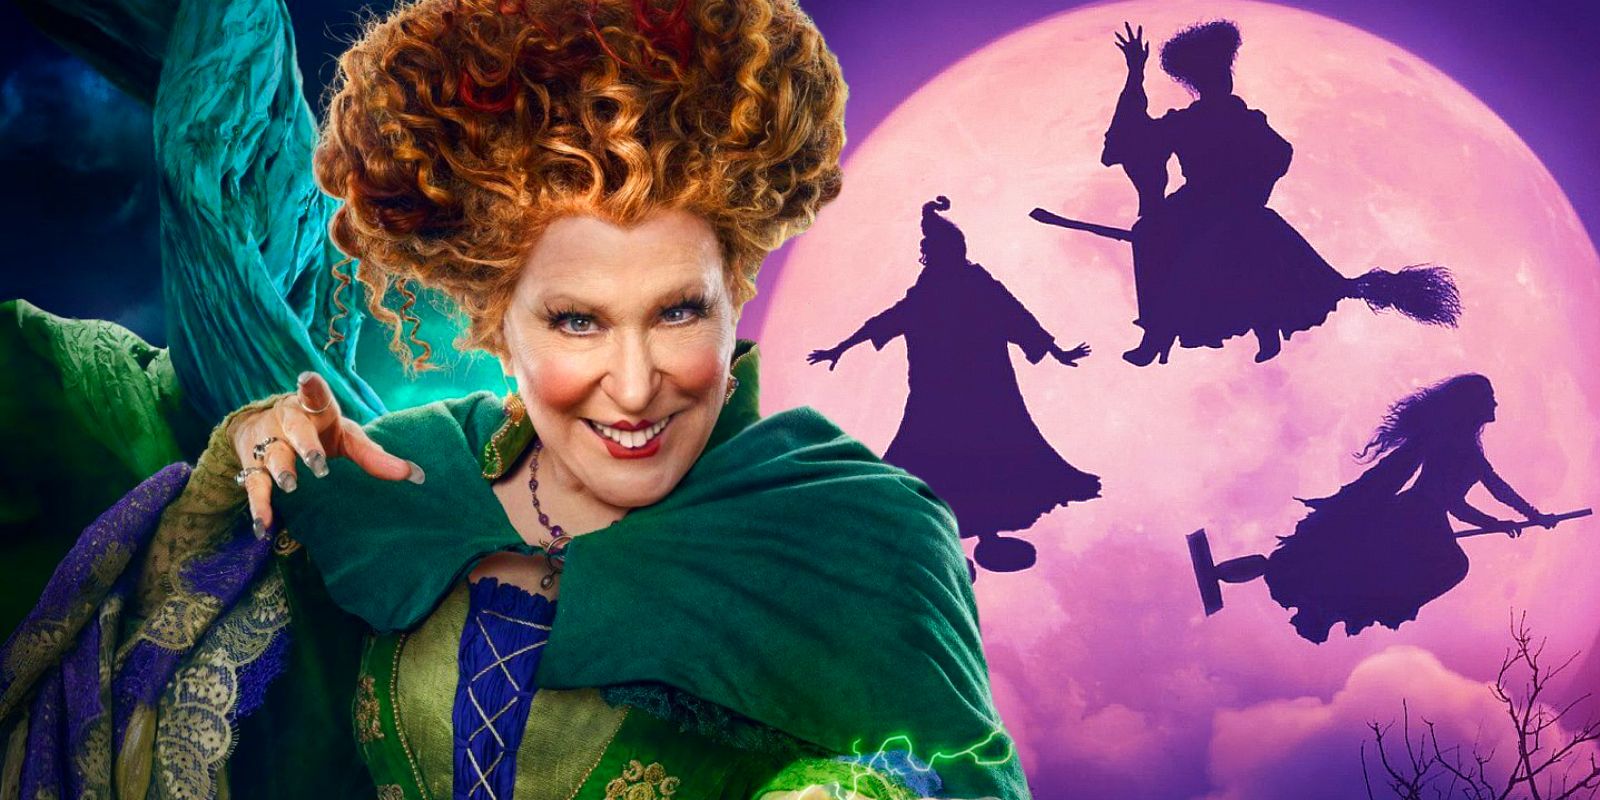 Bette Midler as Winifred Sanderson with the Hocus Pocus 2 poster